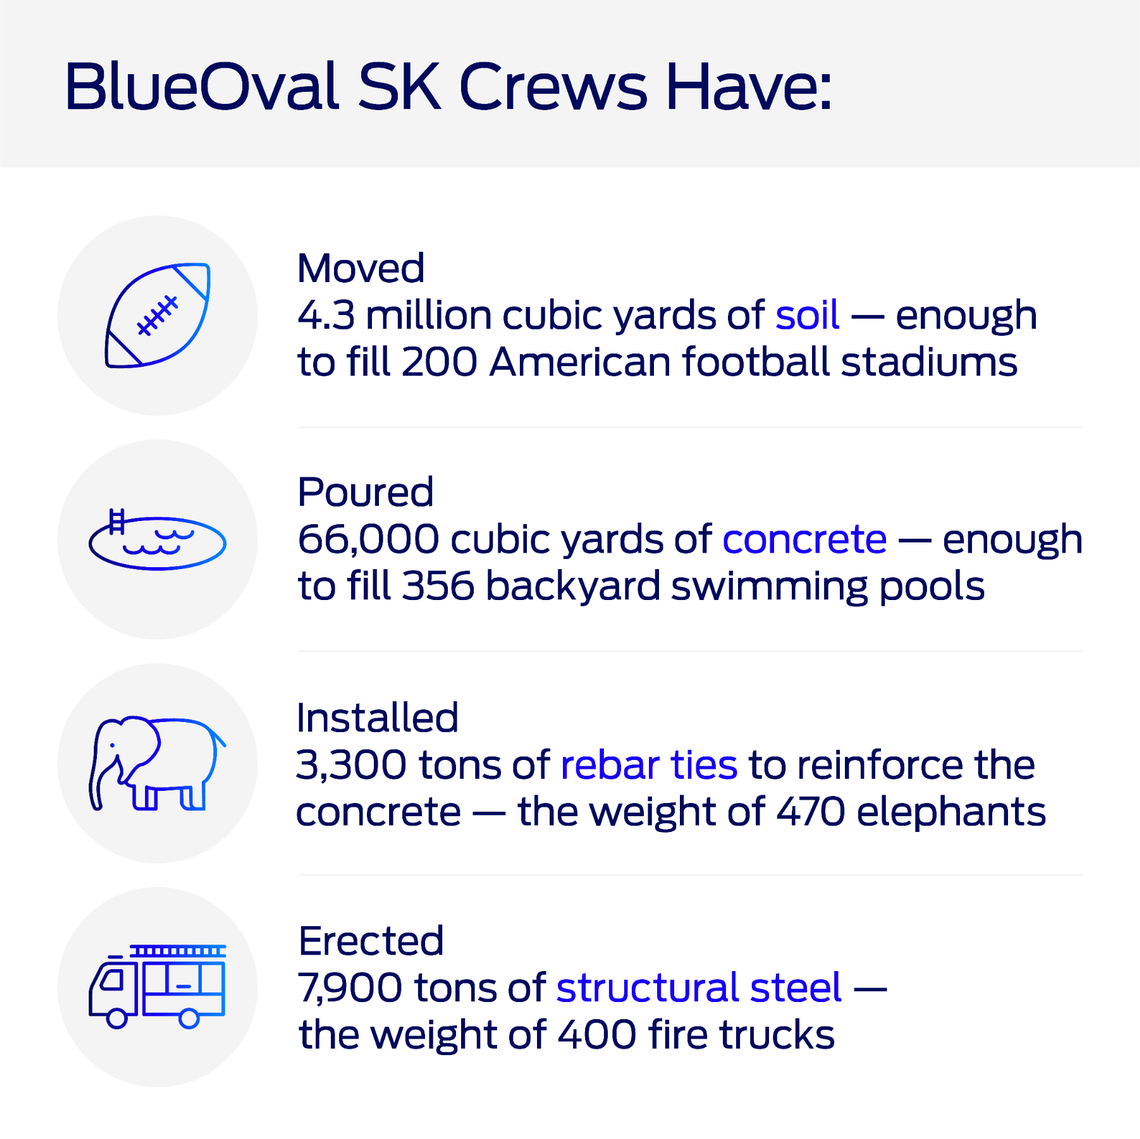 BlueOval SK released a graphic regarding construction progress at its new Kentucky battery park. BlueOval SK